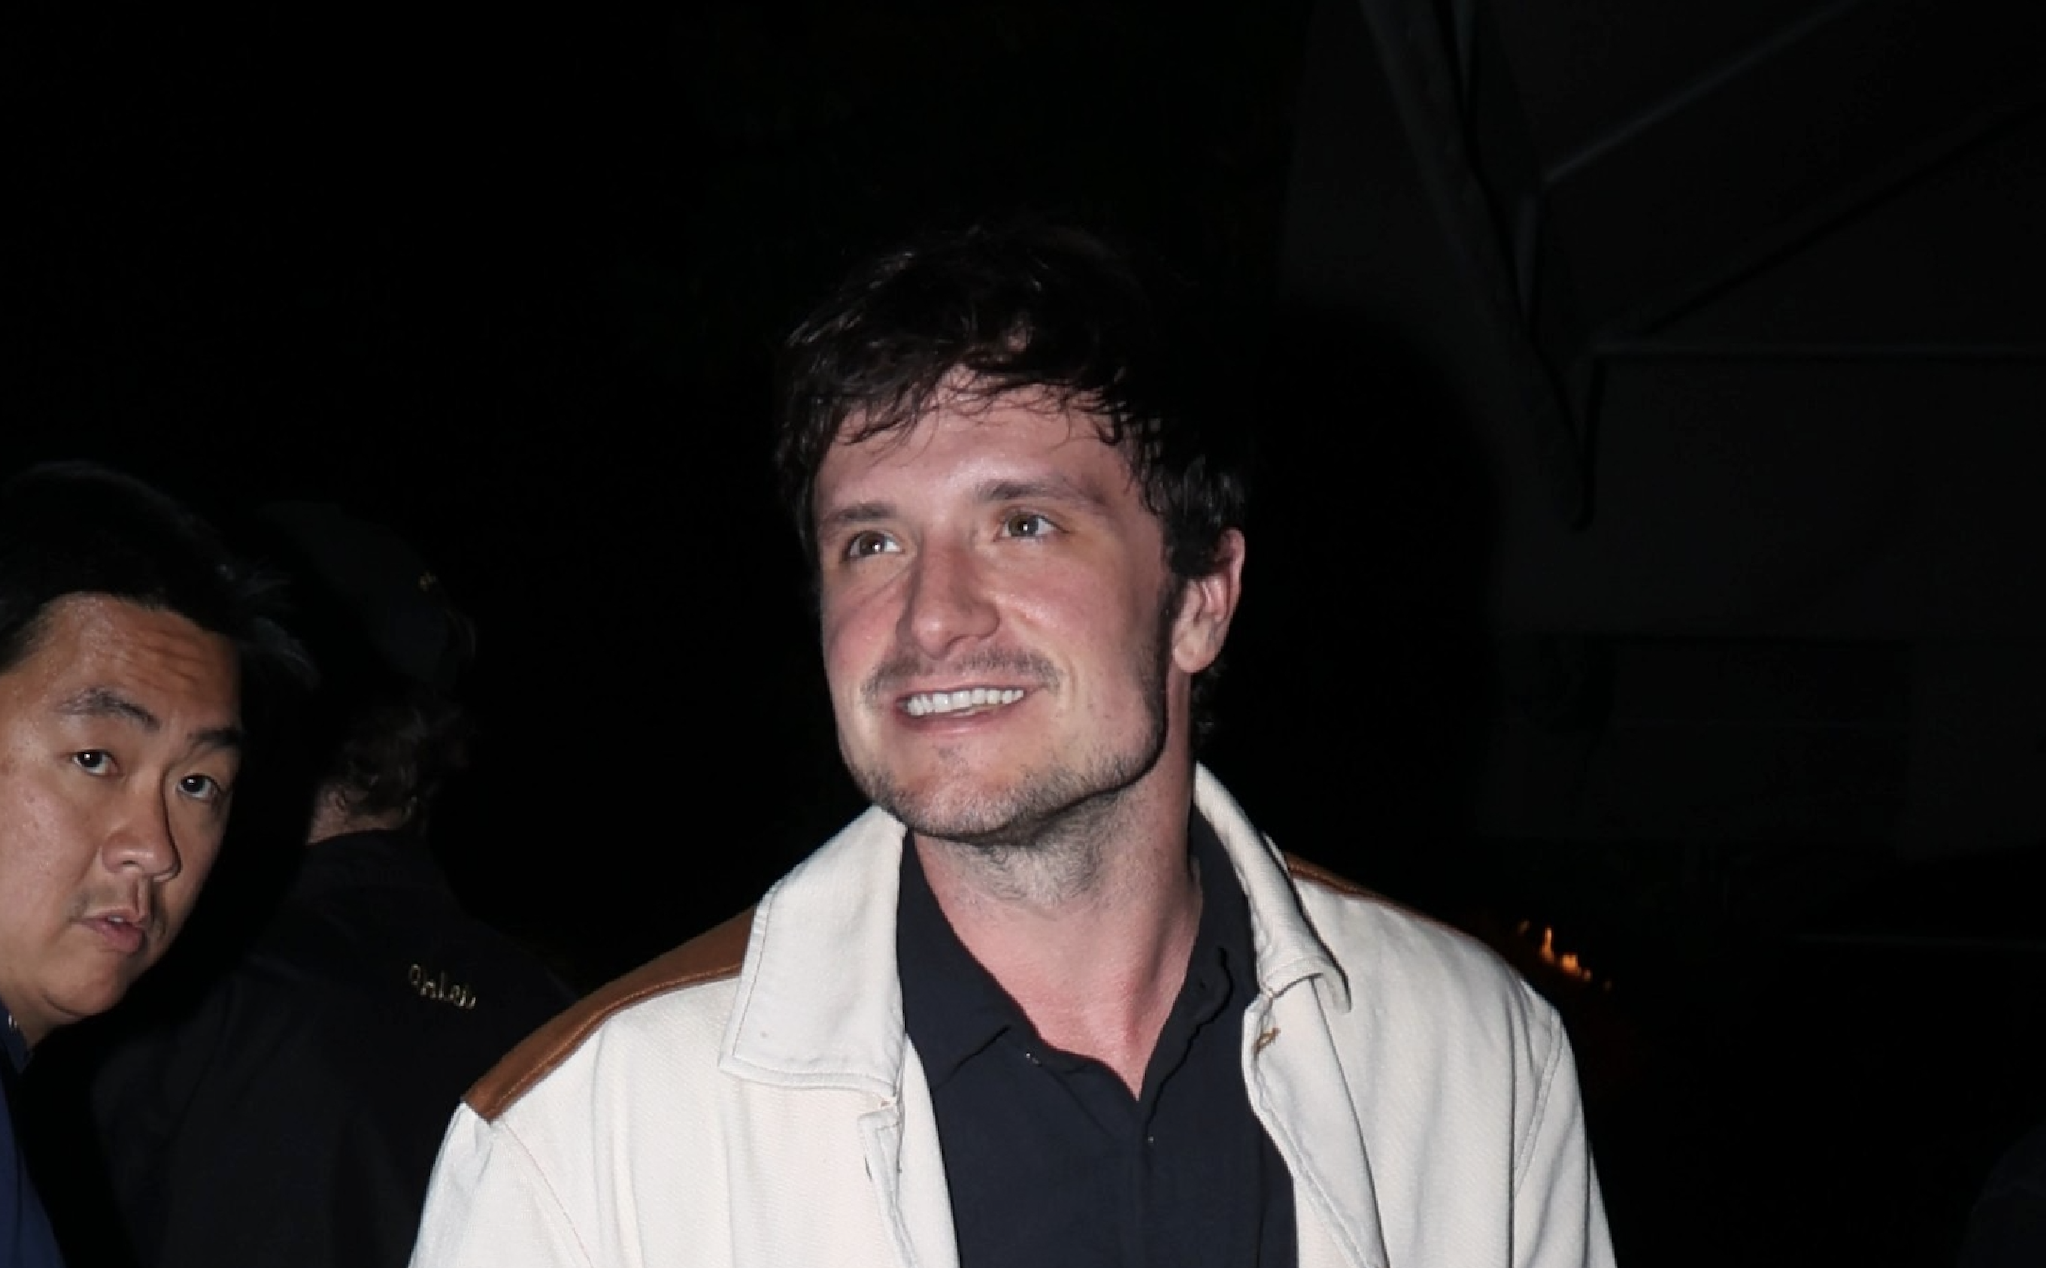 Josh Hutcherson, wearing a navy blue collared shirt under a white leather jacket looks off as he exits a car in a paparazzi photo. He has scruff and messy dark brown hair.